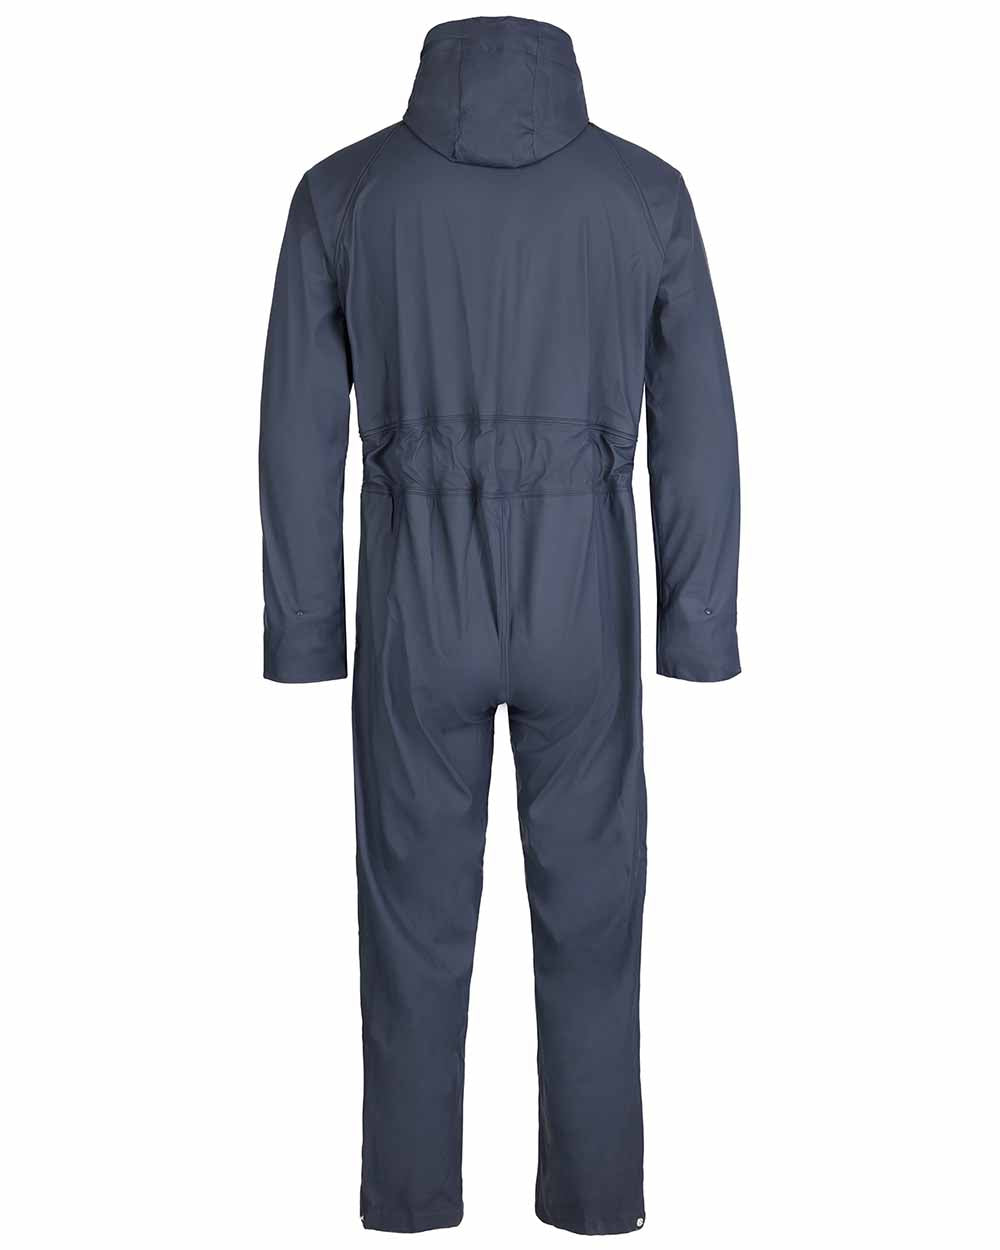 Back view Fort Fortex Flex Waterproof Coverall 